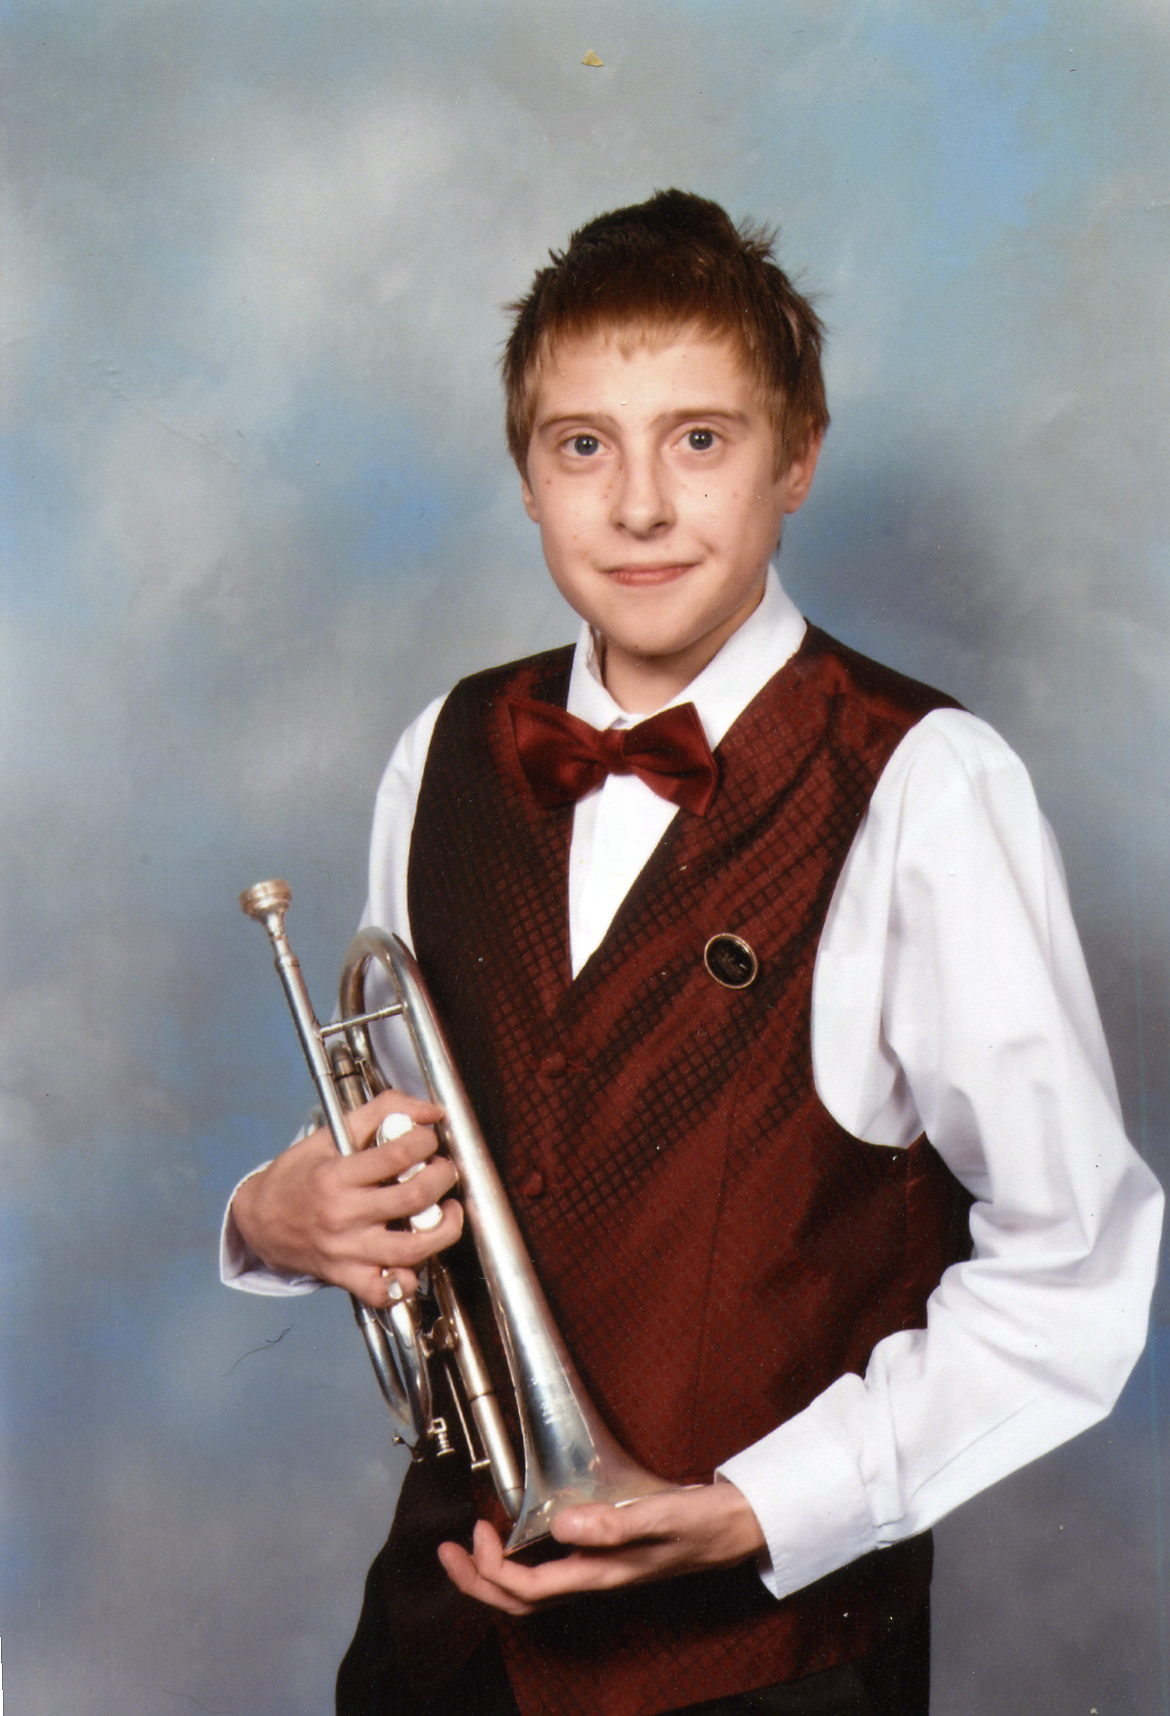 James Sparks in his Shanklin Town Youth Brass Band uniform